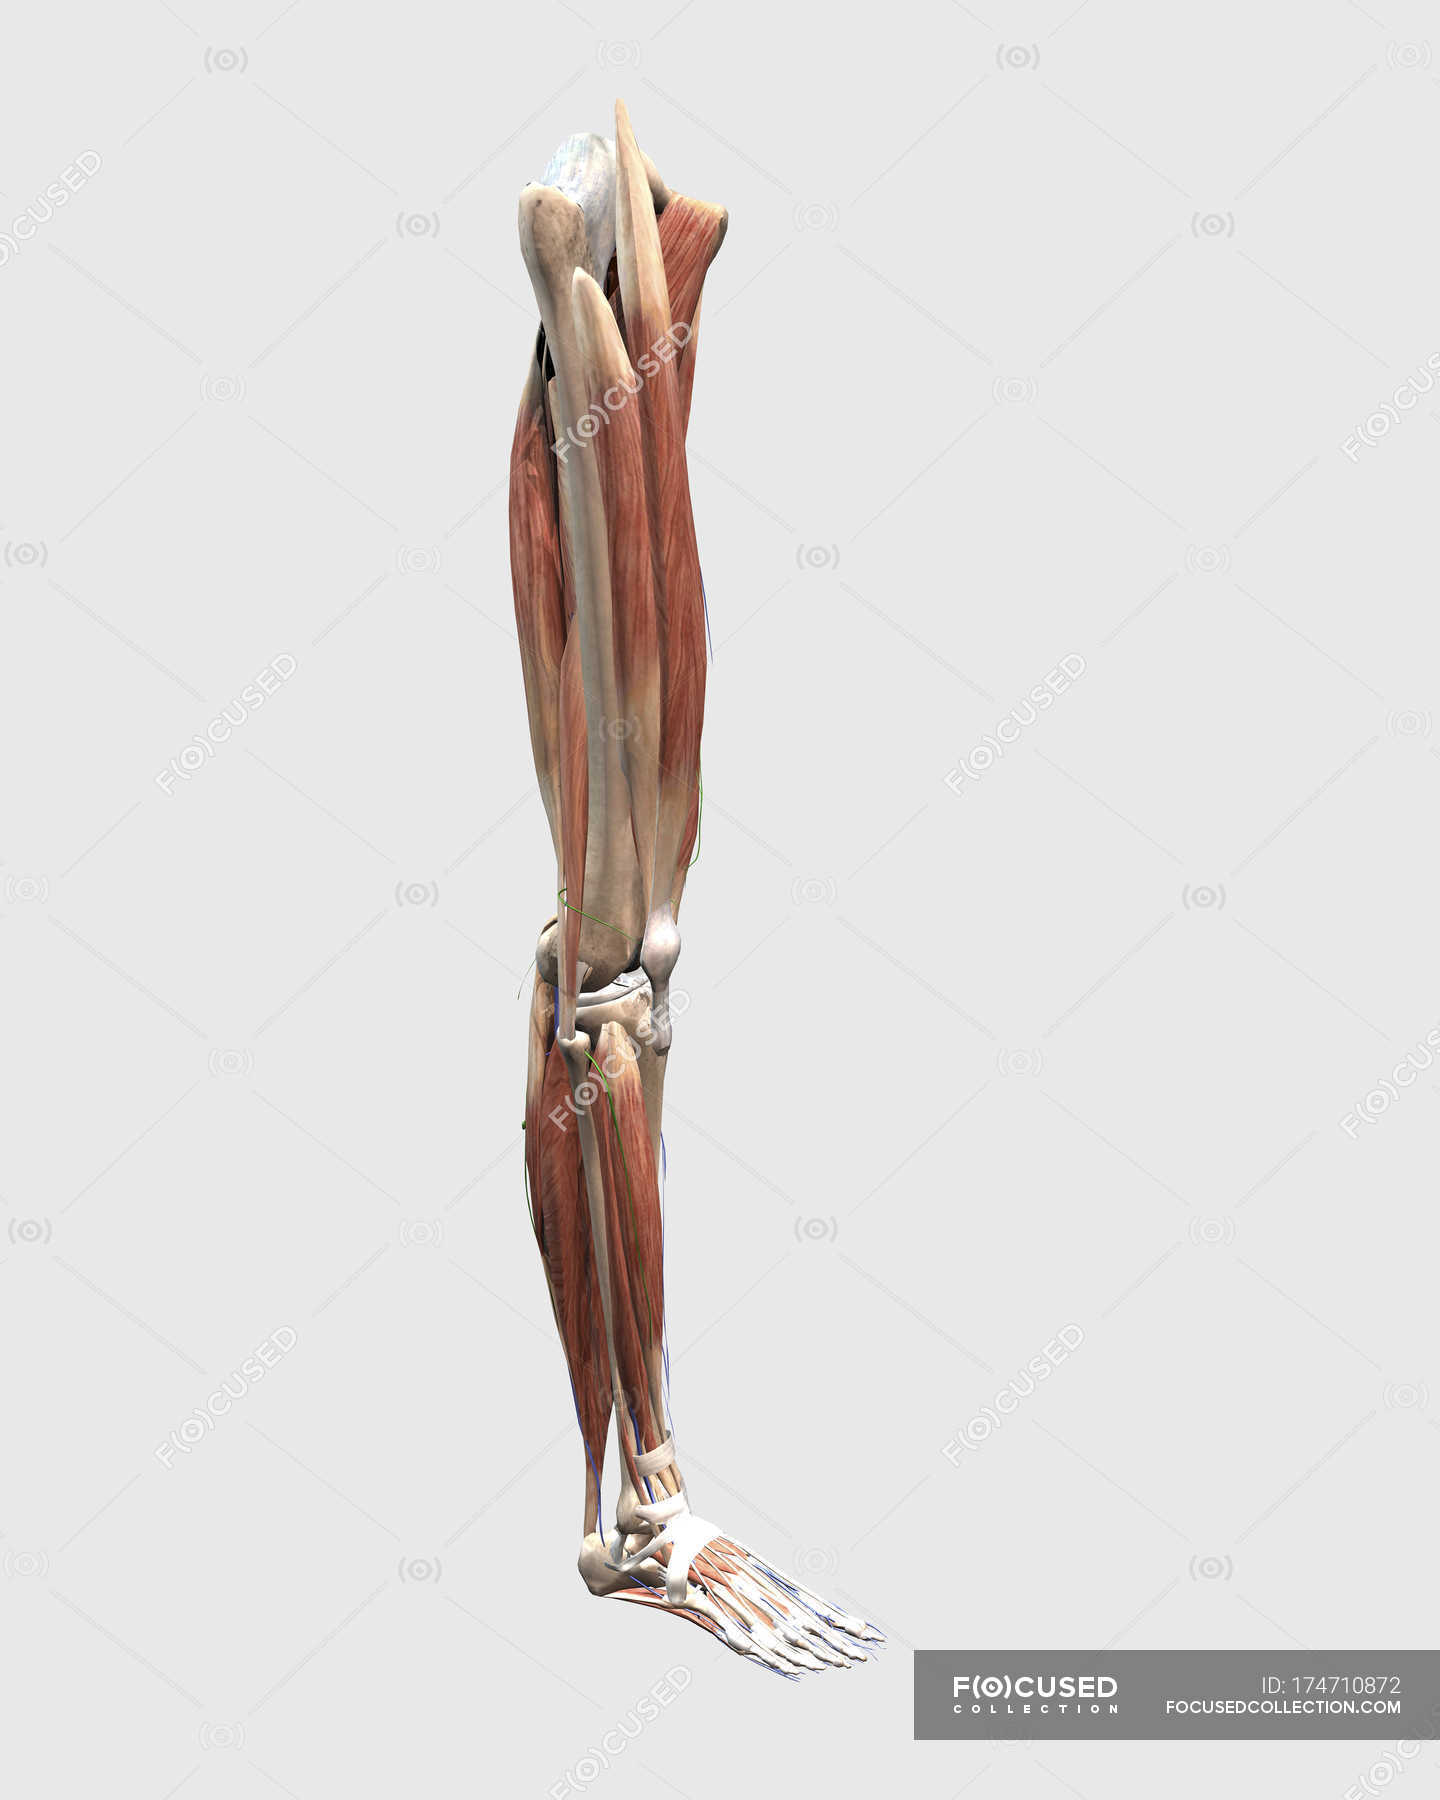 Muscles And Bones Of A Human Leg - Anatomy Of Leg And Foot Anatomy Of ...